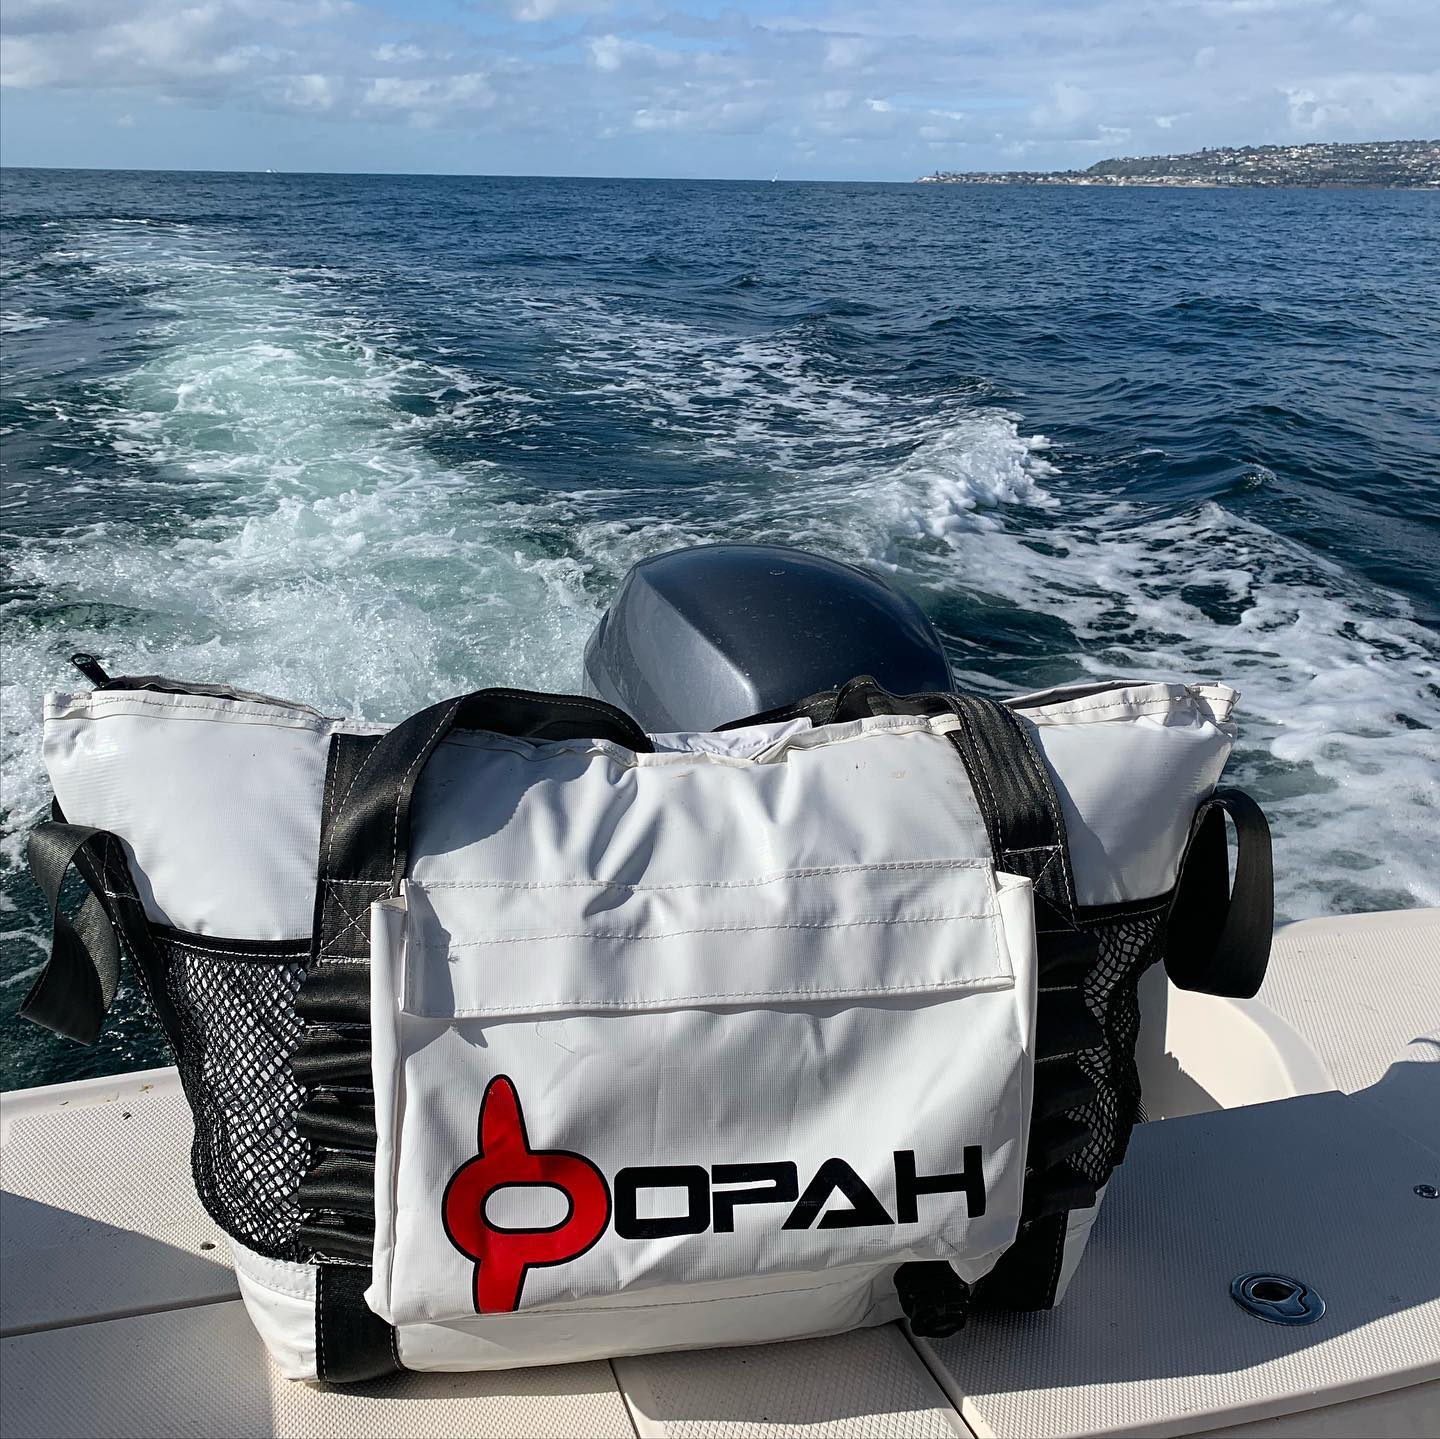 Opah Gear Fathom 3 Fish Cooler Bag Kill Bag. Protect your catch longer. The most reliable fish bag on the market. Purposely built to be the highest quality fish cooler bag in sportfishing. Even great when used as an insulated cooler bag while out camping or for other normal use. The highest quality insulated bag. A perfect Tuna Kill Bag, Dorado Kill bag, or yellowtail kill bag. 